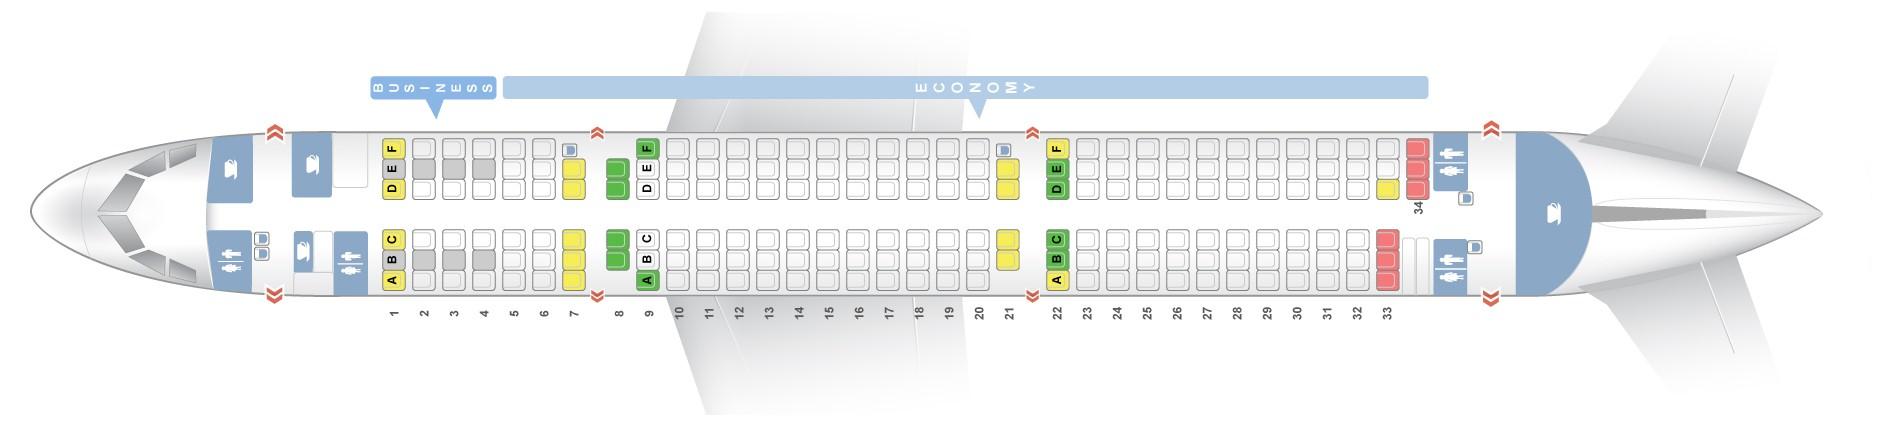 Seat map Airbus A321200 "Finnair". Best seats in the plane